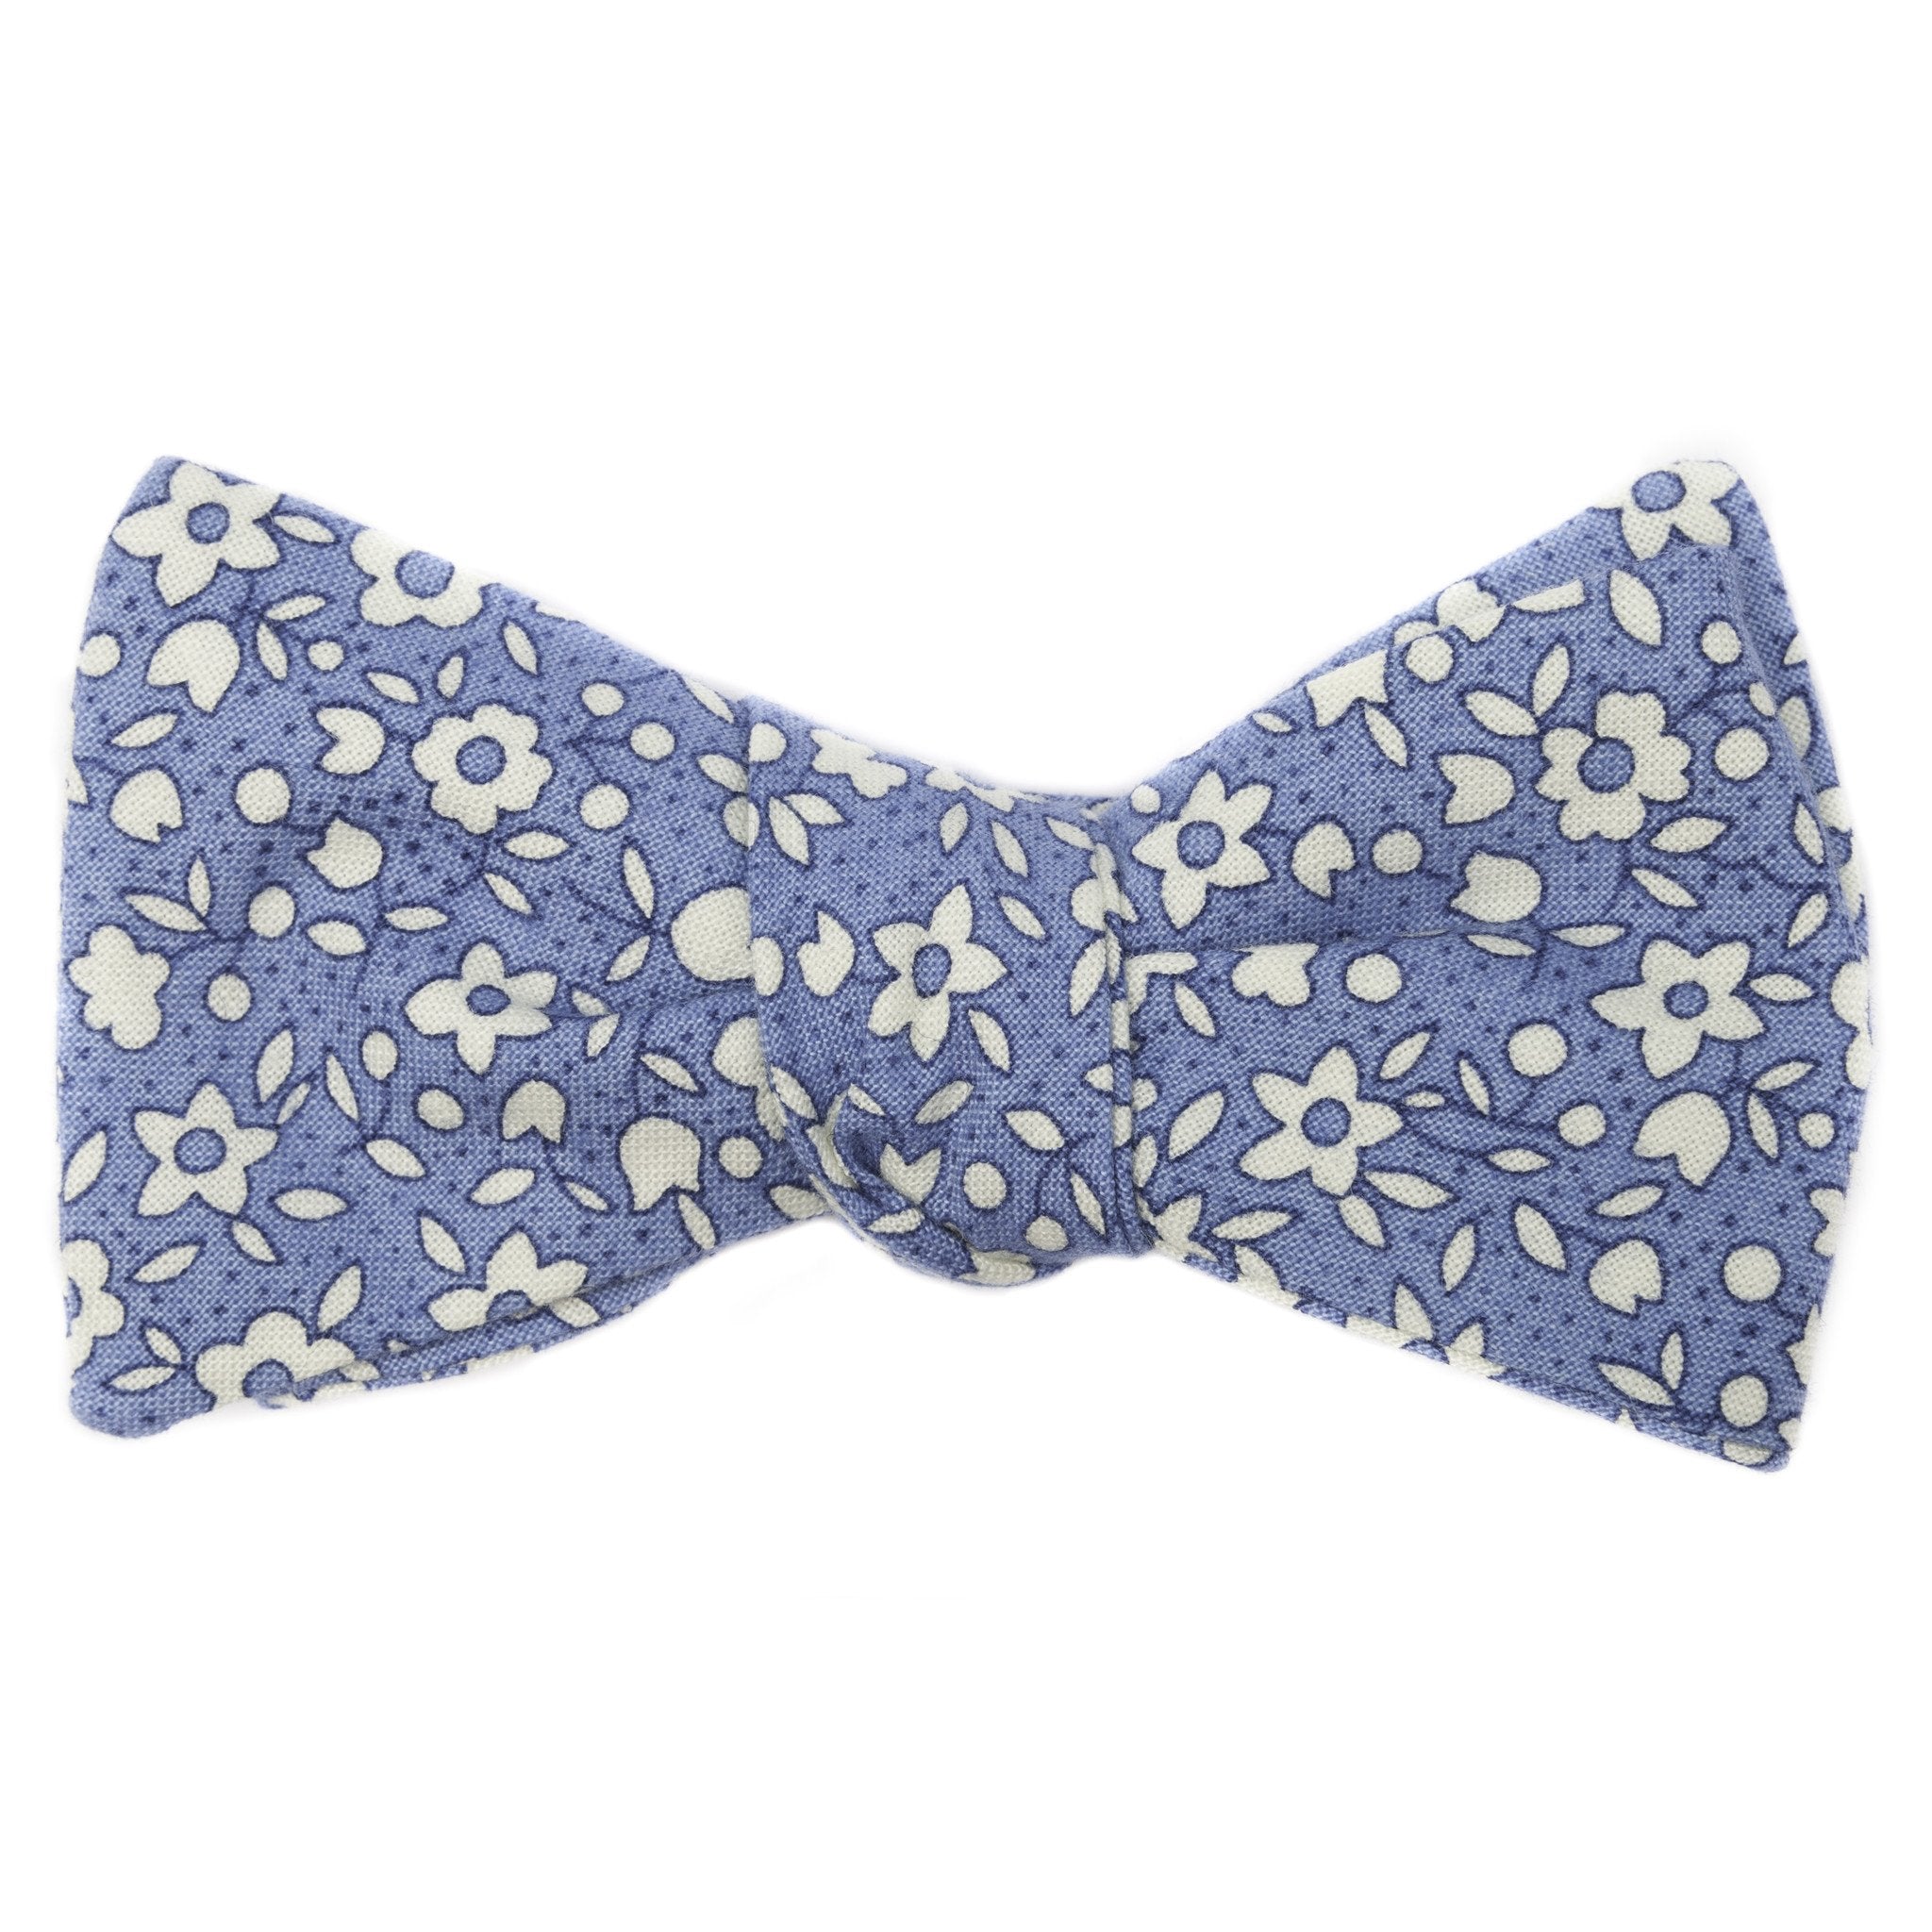 Mill City Fineries Azure Floral Bow Tie